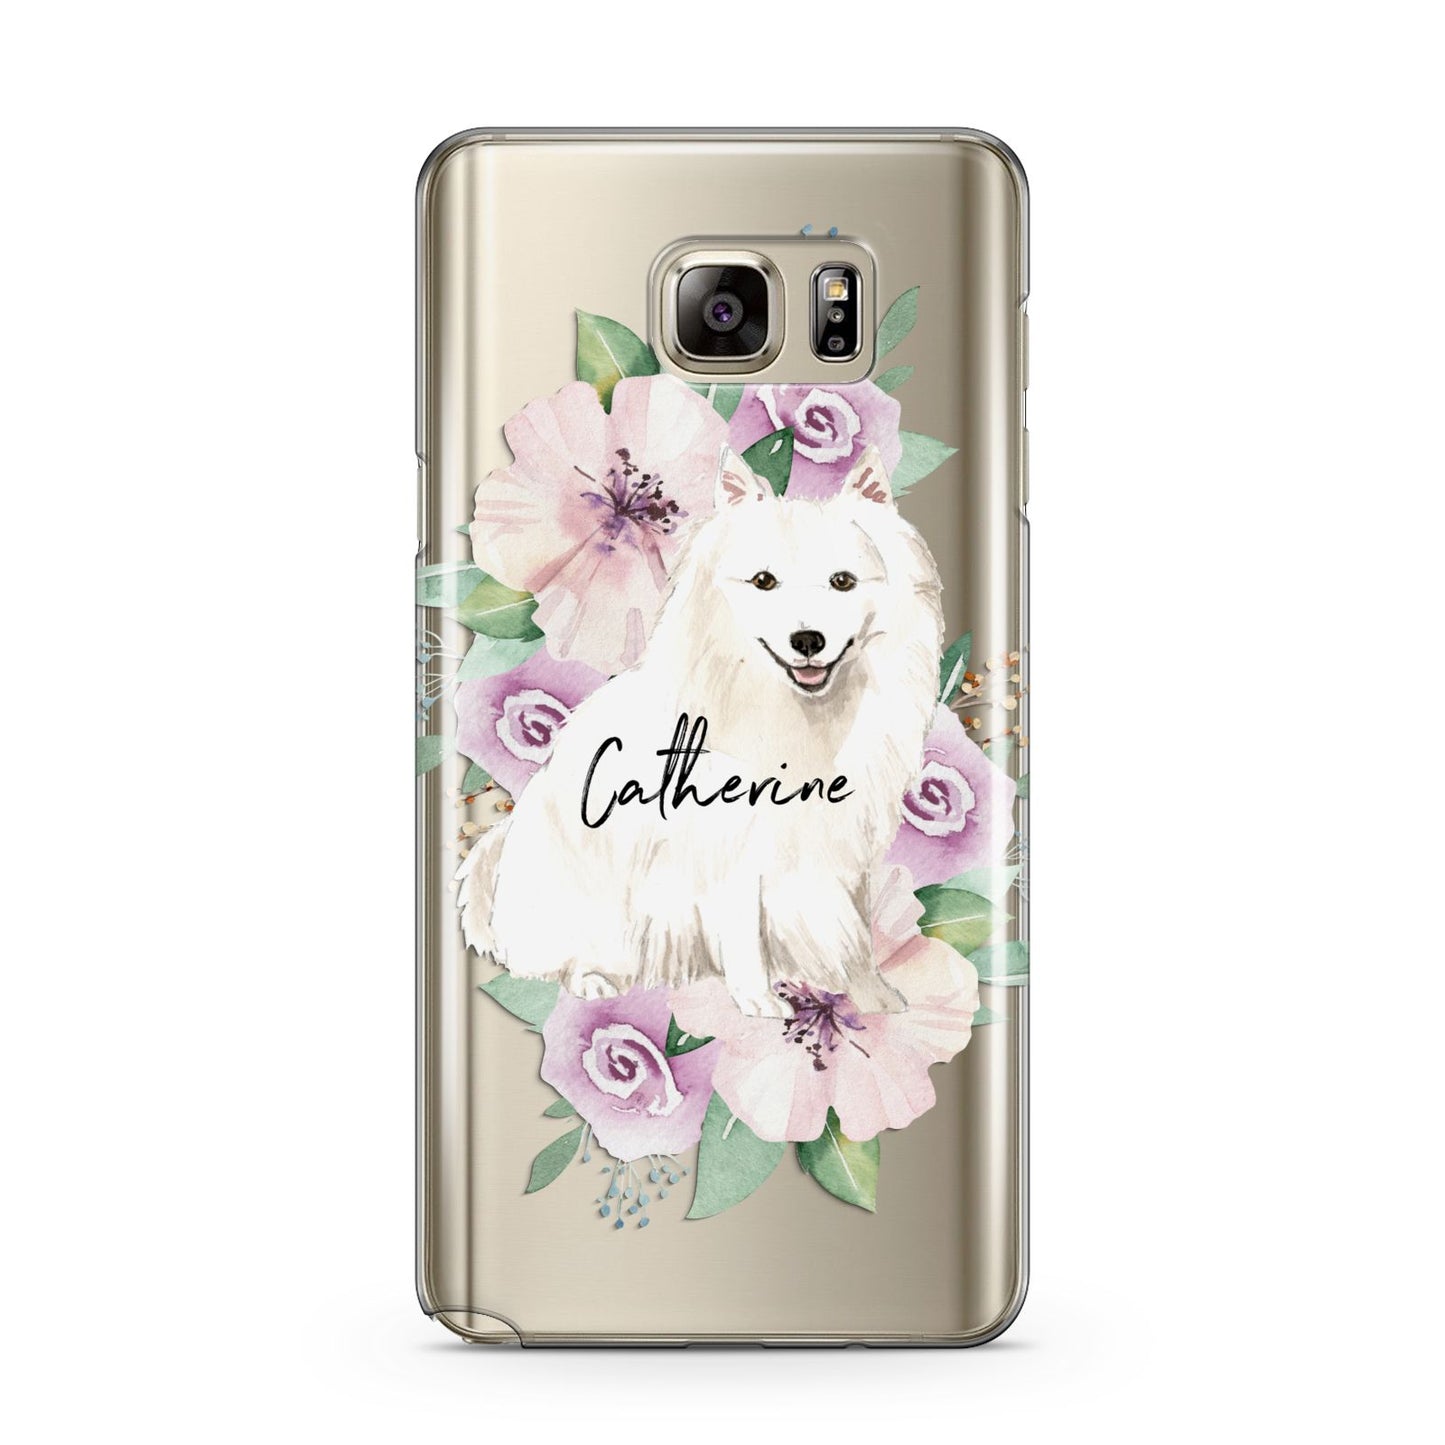 Personalised Japanese Spitz Samsung Galaxy Note 5 Case